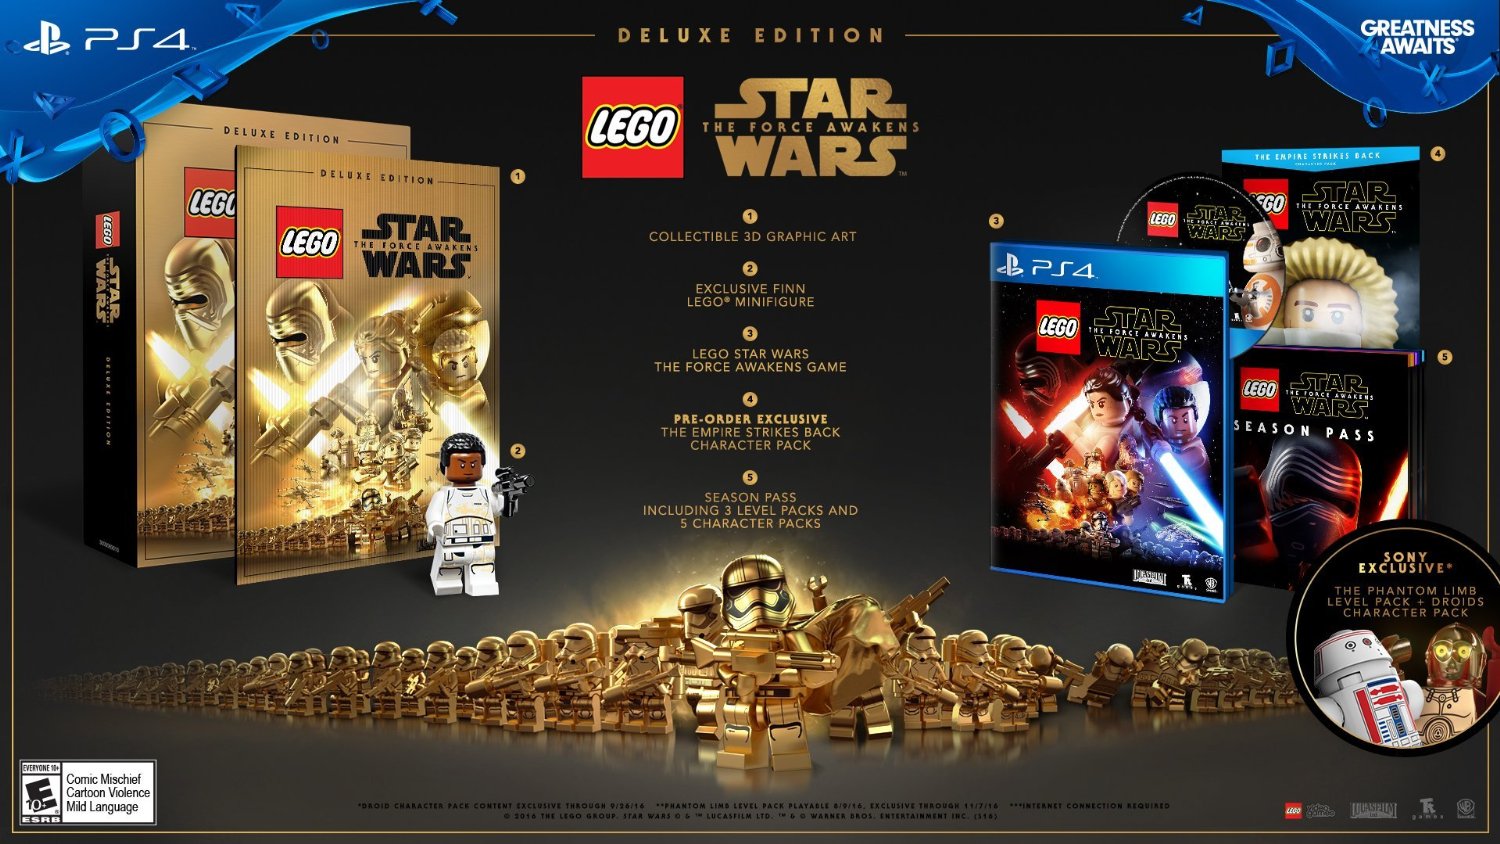 LEGO Star Wars The Force Awakens Demo Now Available for Playstation 4 - FBTB